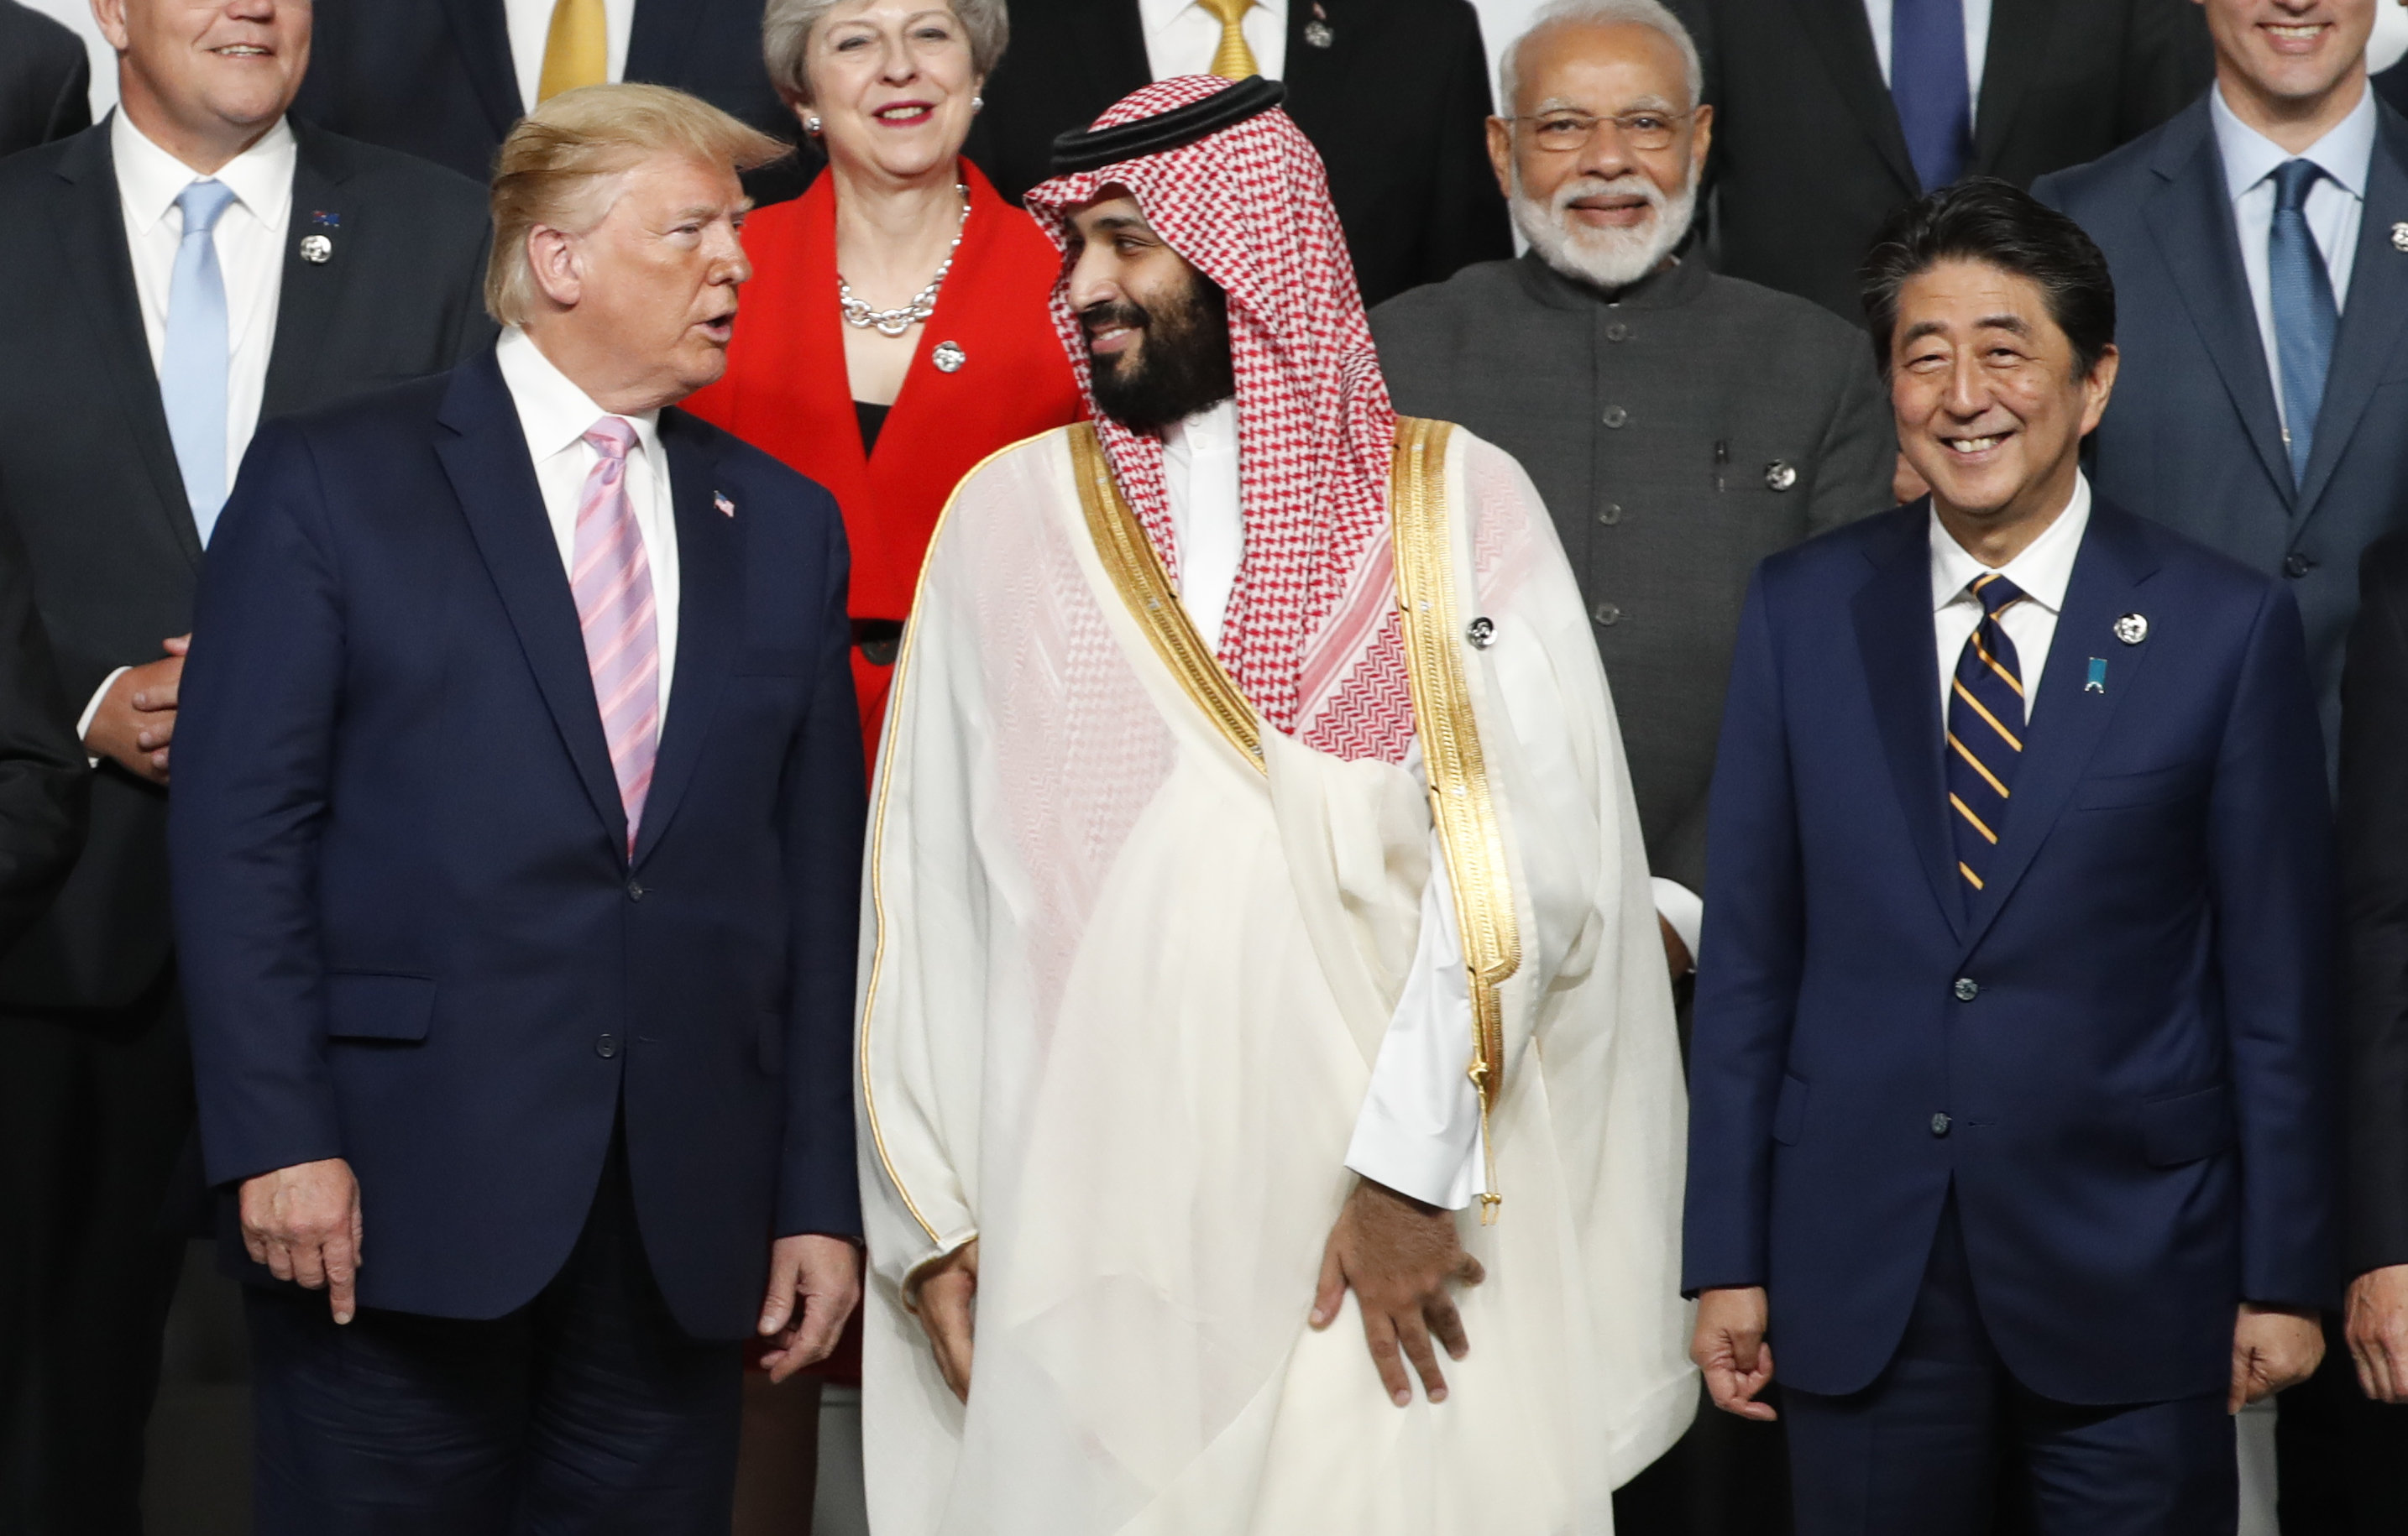 Trump And Saudi Crown Prince Discussed Iran Trade And Human Rights